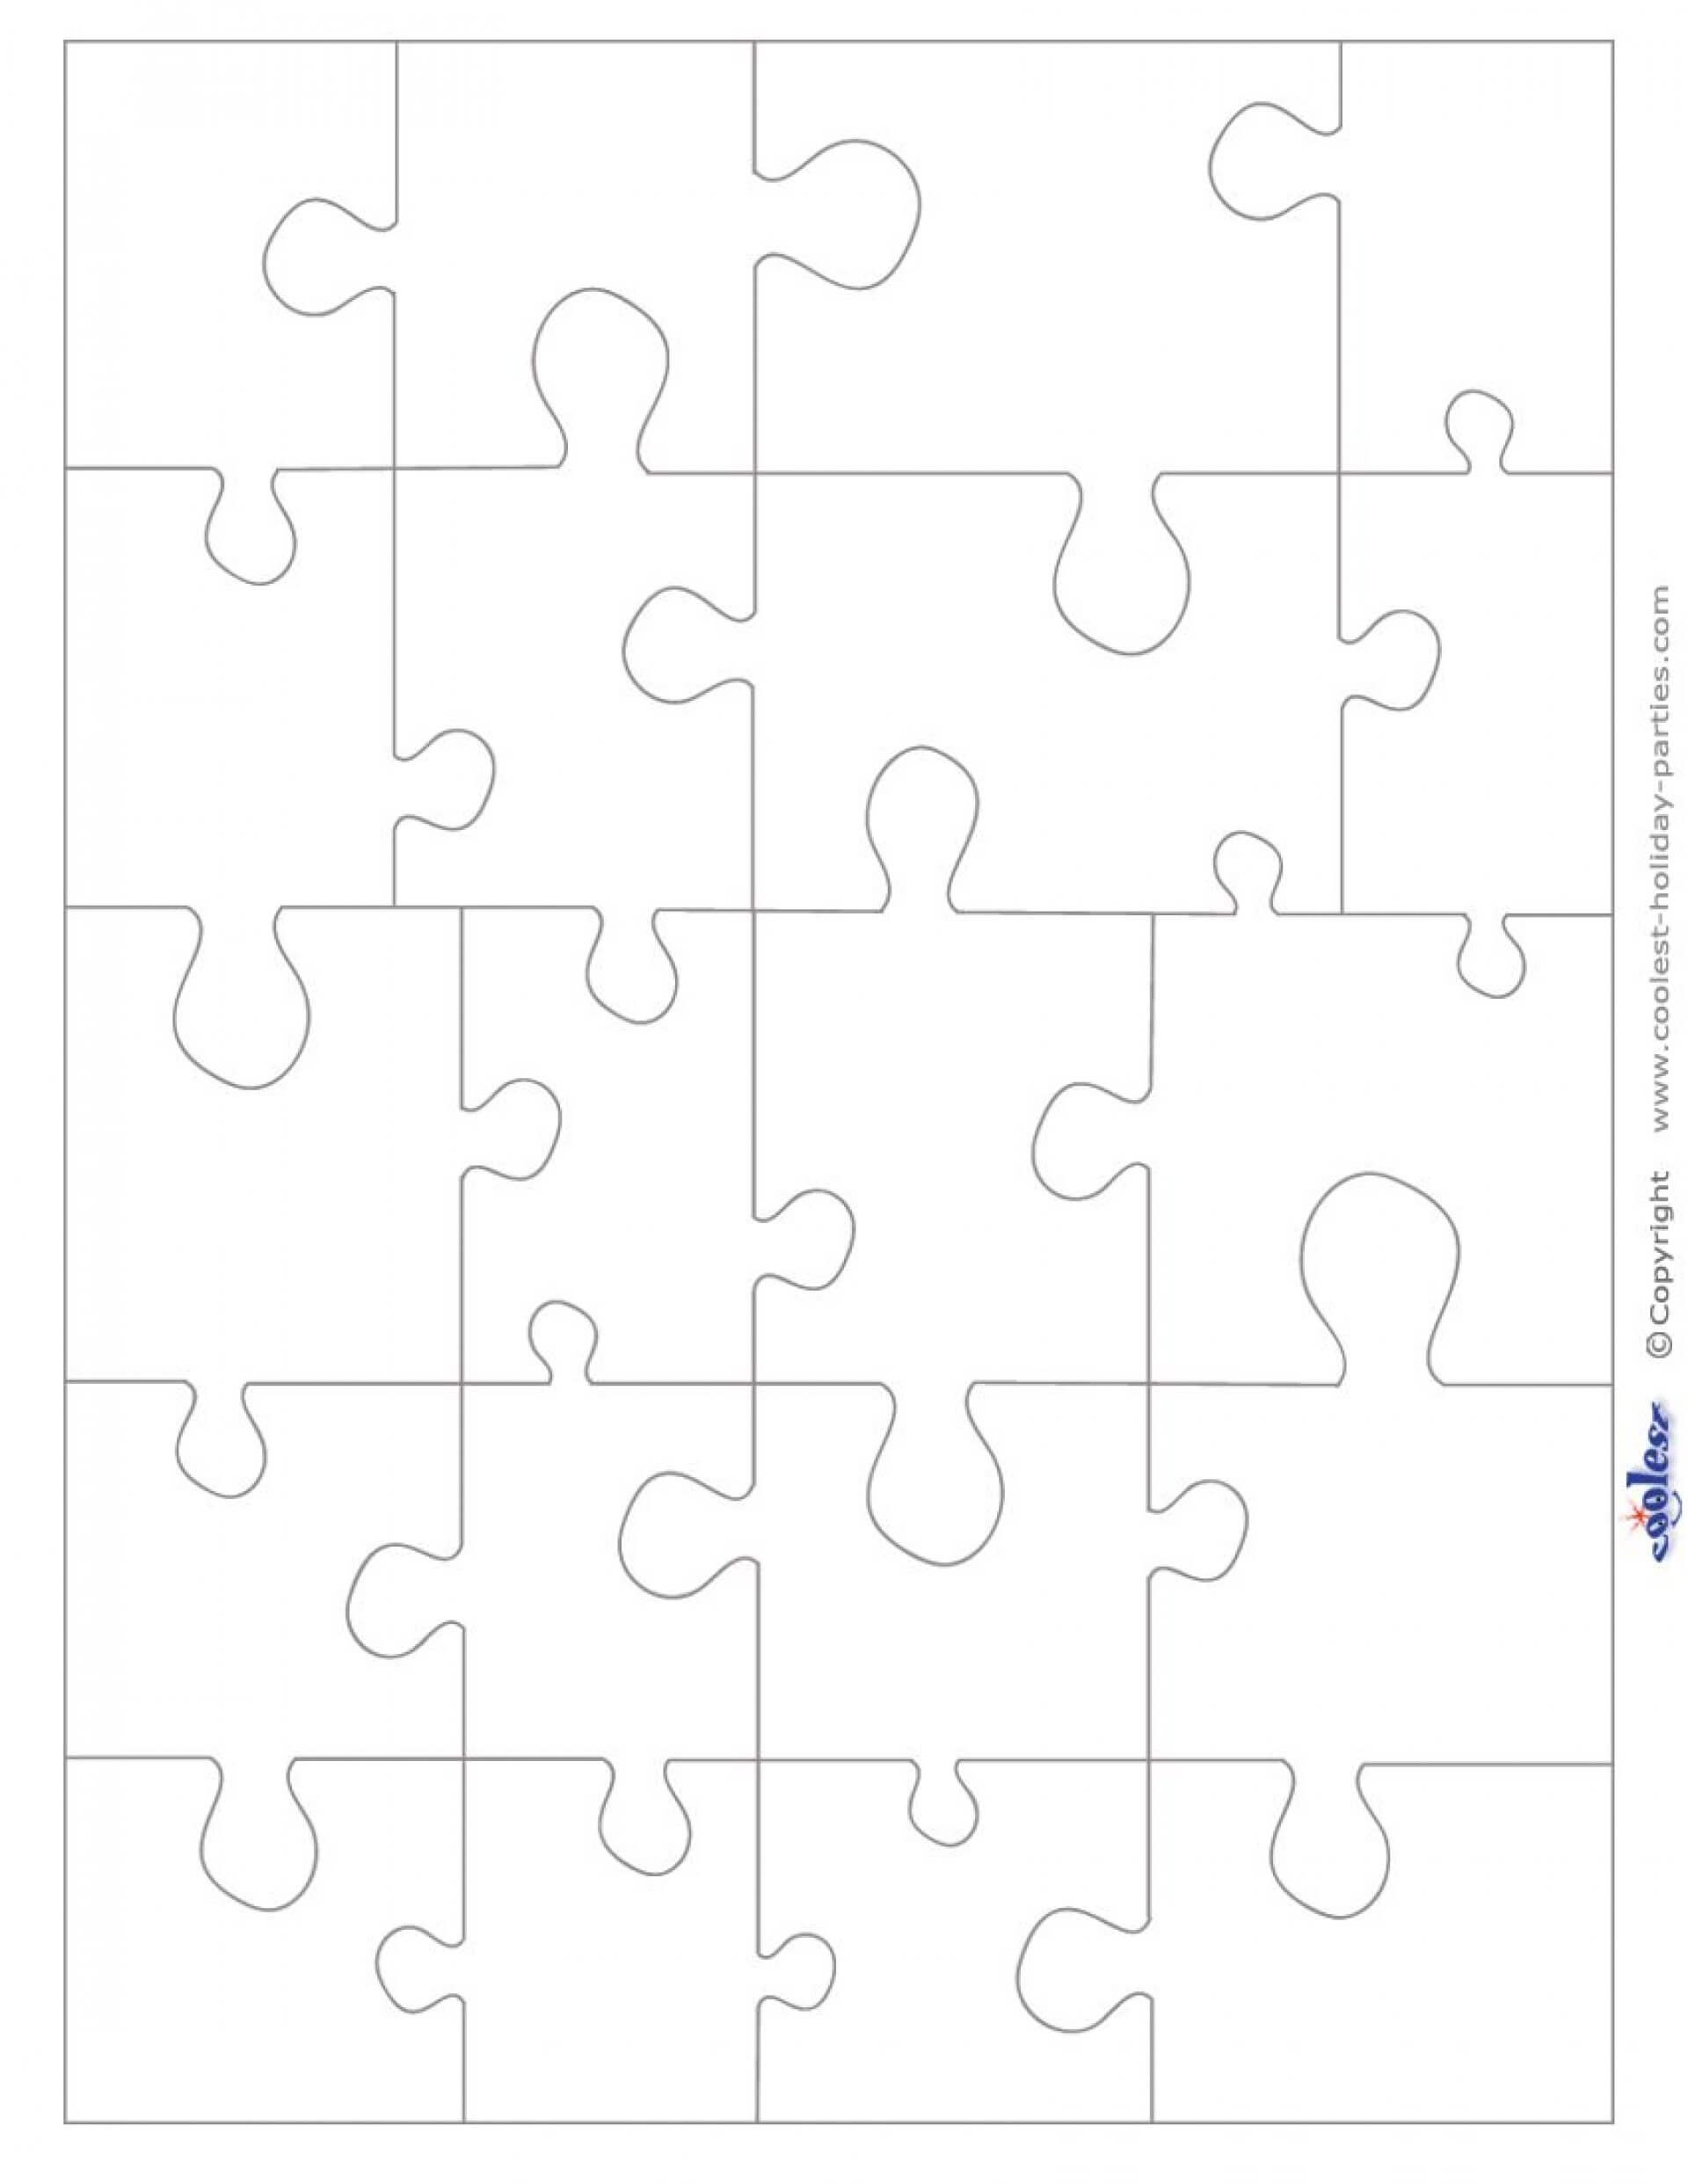 020 Template Ideas Blank Puzzle Fearsome Pieces Pdf 2 Piece Within Blank Jigsaw Piece Template